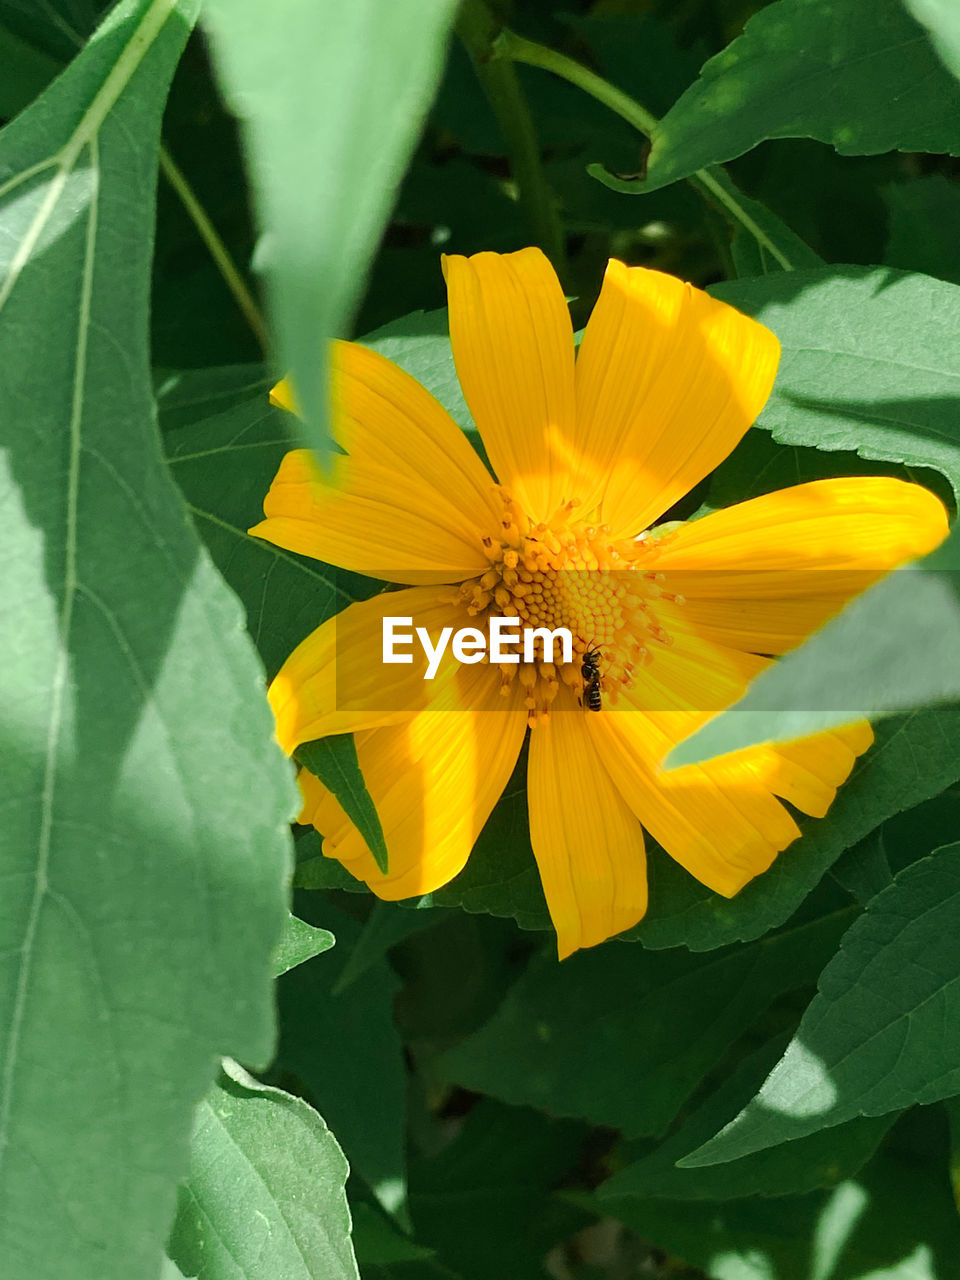 flower, flowering plant, plant, freshness, beauty in nature, flower head, yellow, leaf, plant part, growth, petal, fragility, close-up, inflorescence, nature, green, no people, pollen, botany, outdoors, blossom, springtime, day, sunflower, animal wildlife